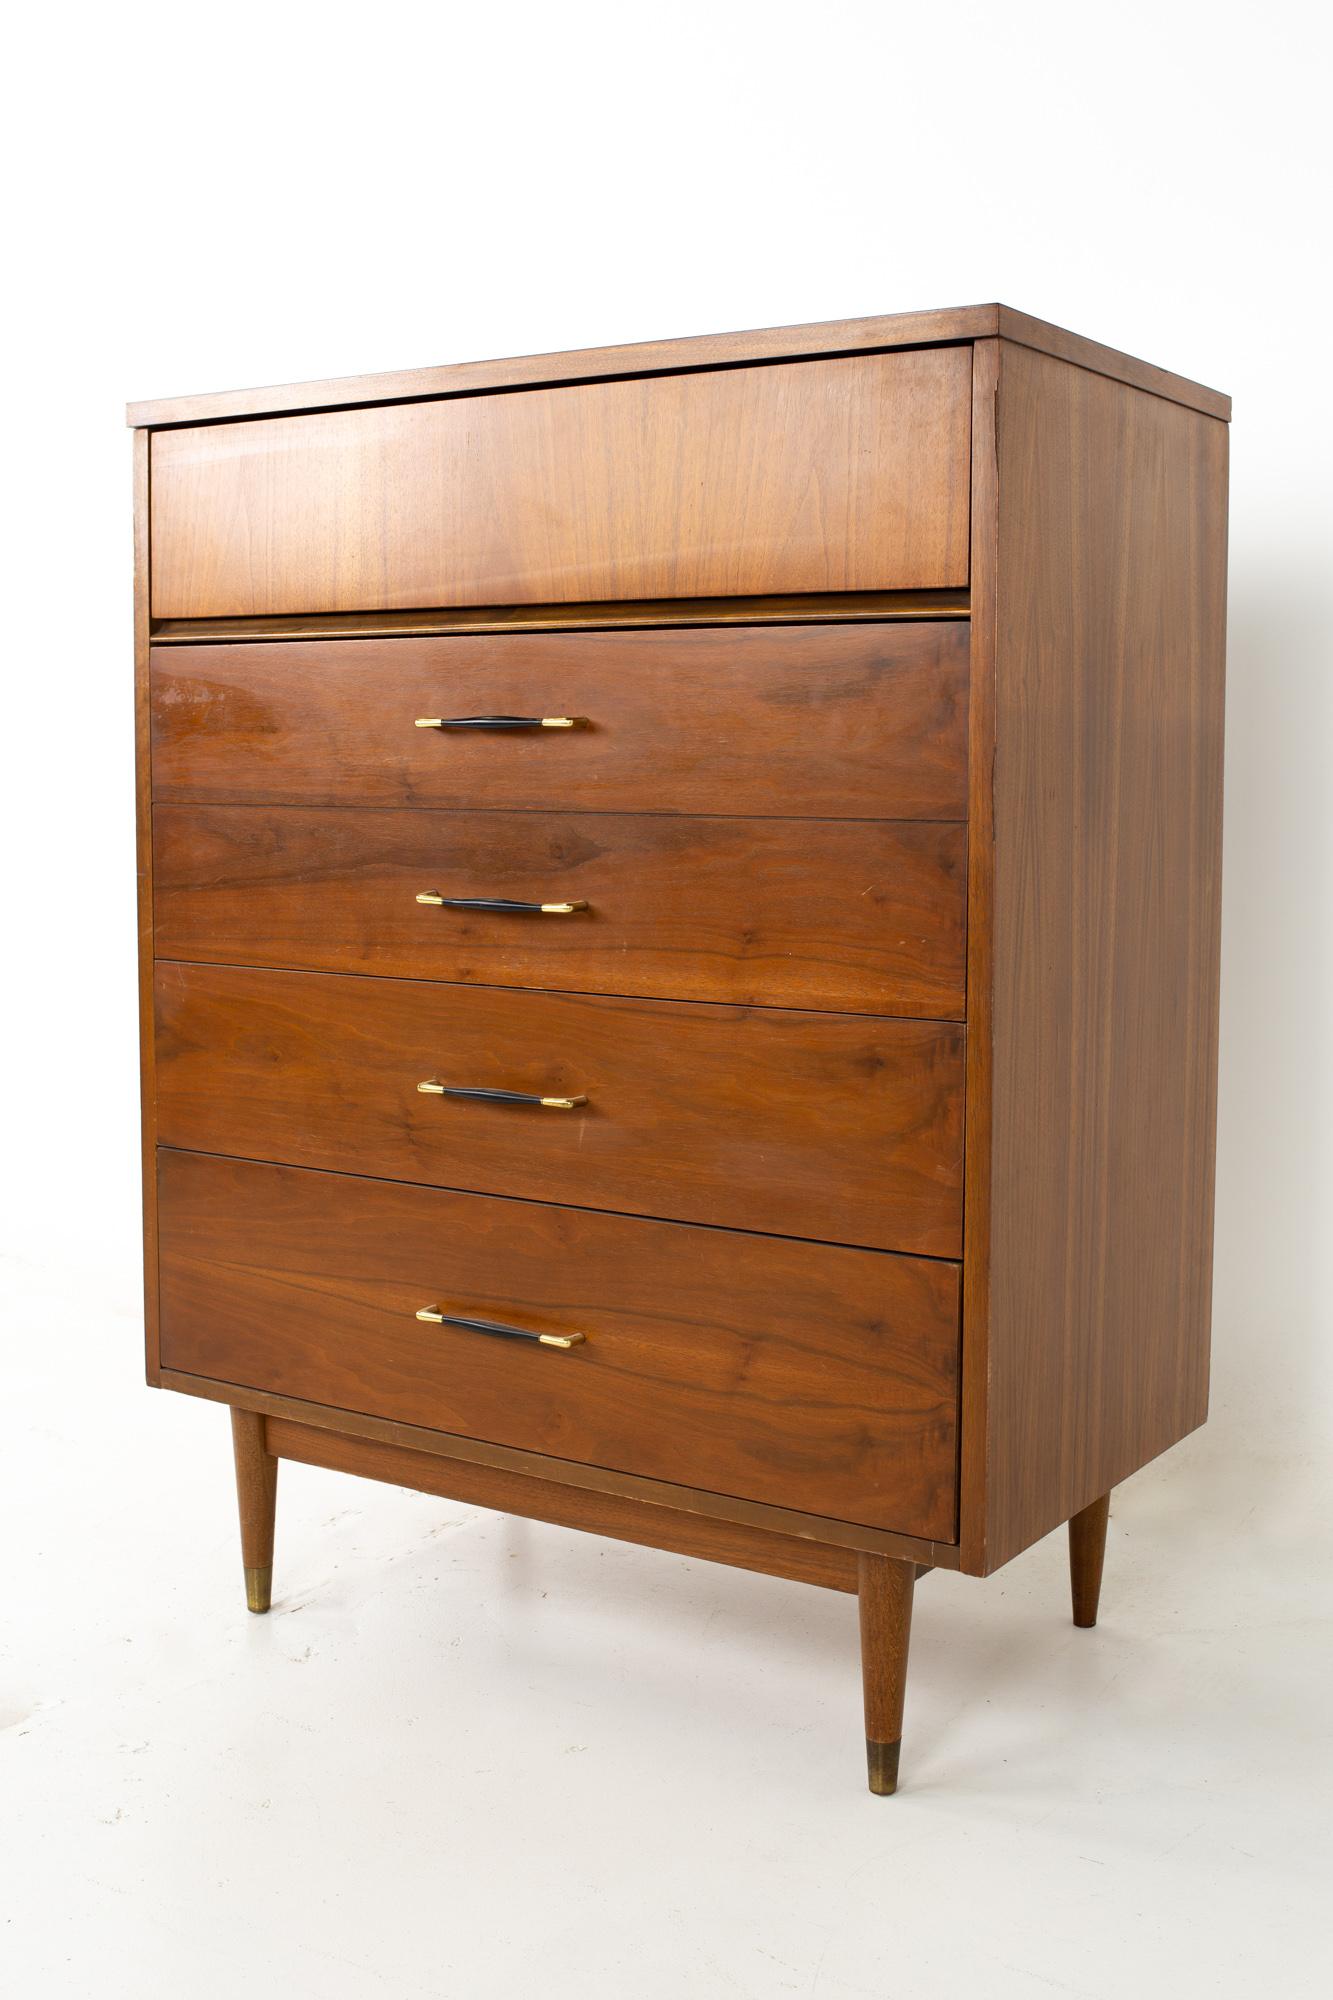 Mid century walnut brass and leather 5 drawer highboy dresser
Dresser measures: 34 wide x 18 deep x 43.5 inches high

All pieces of furniture can be had in what we call restored vintage condition. That means the piece is restored upon purchase so